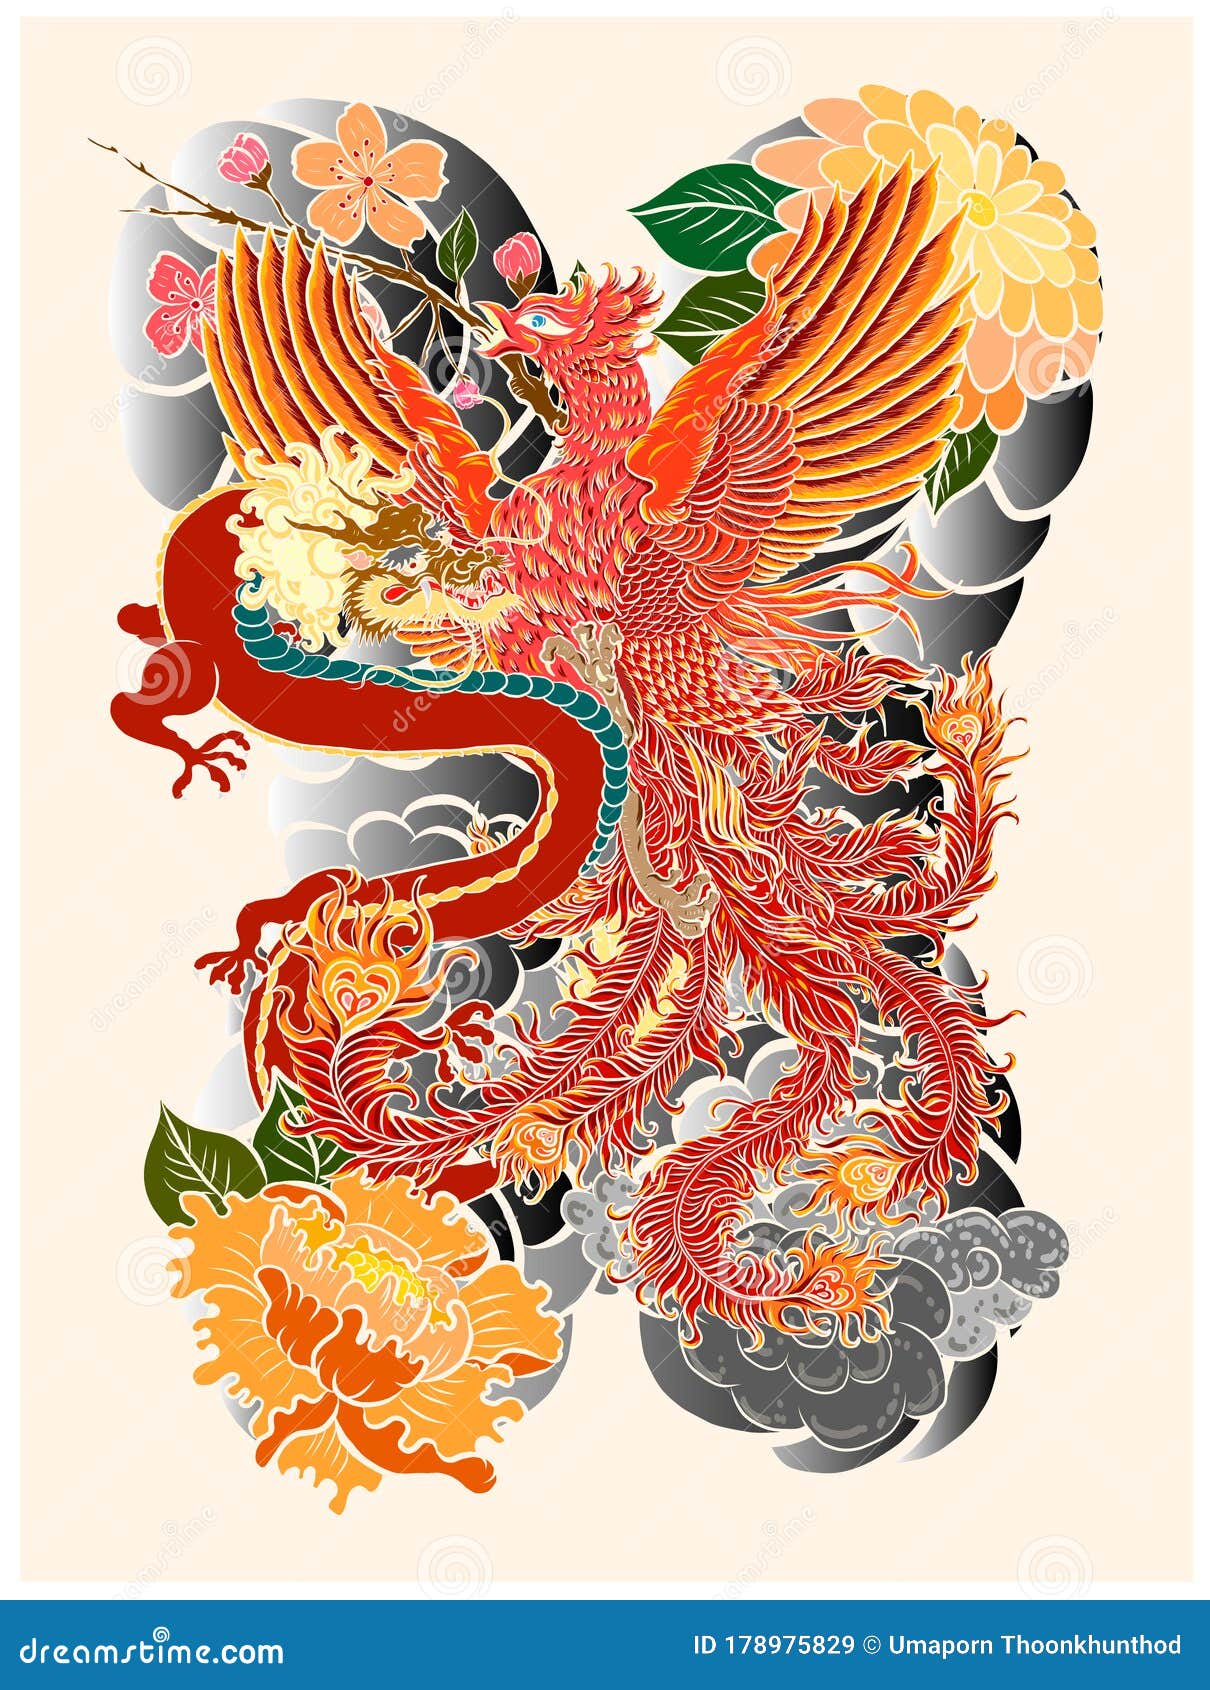 Traditional Dragon Battle With Phoenix For Tattoo Design Stock Vector Illustration Of Animal Culture